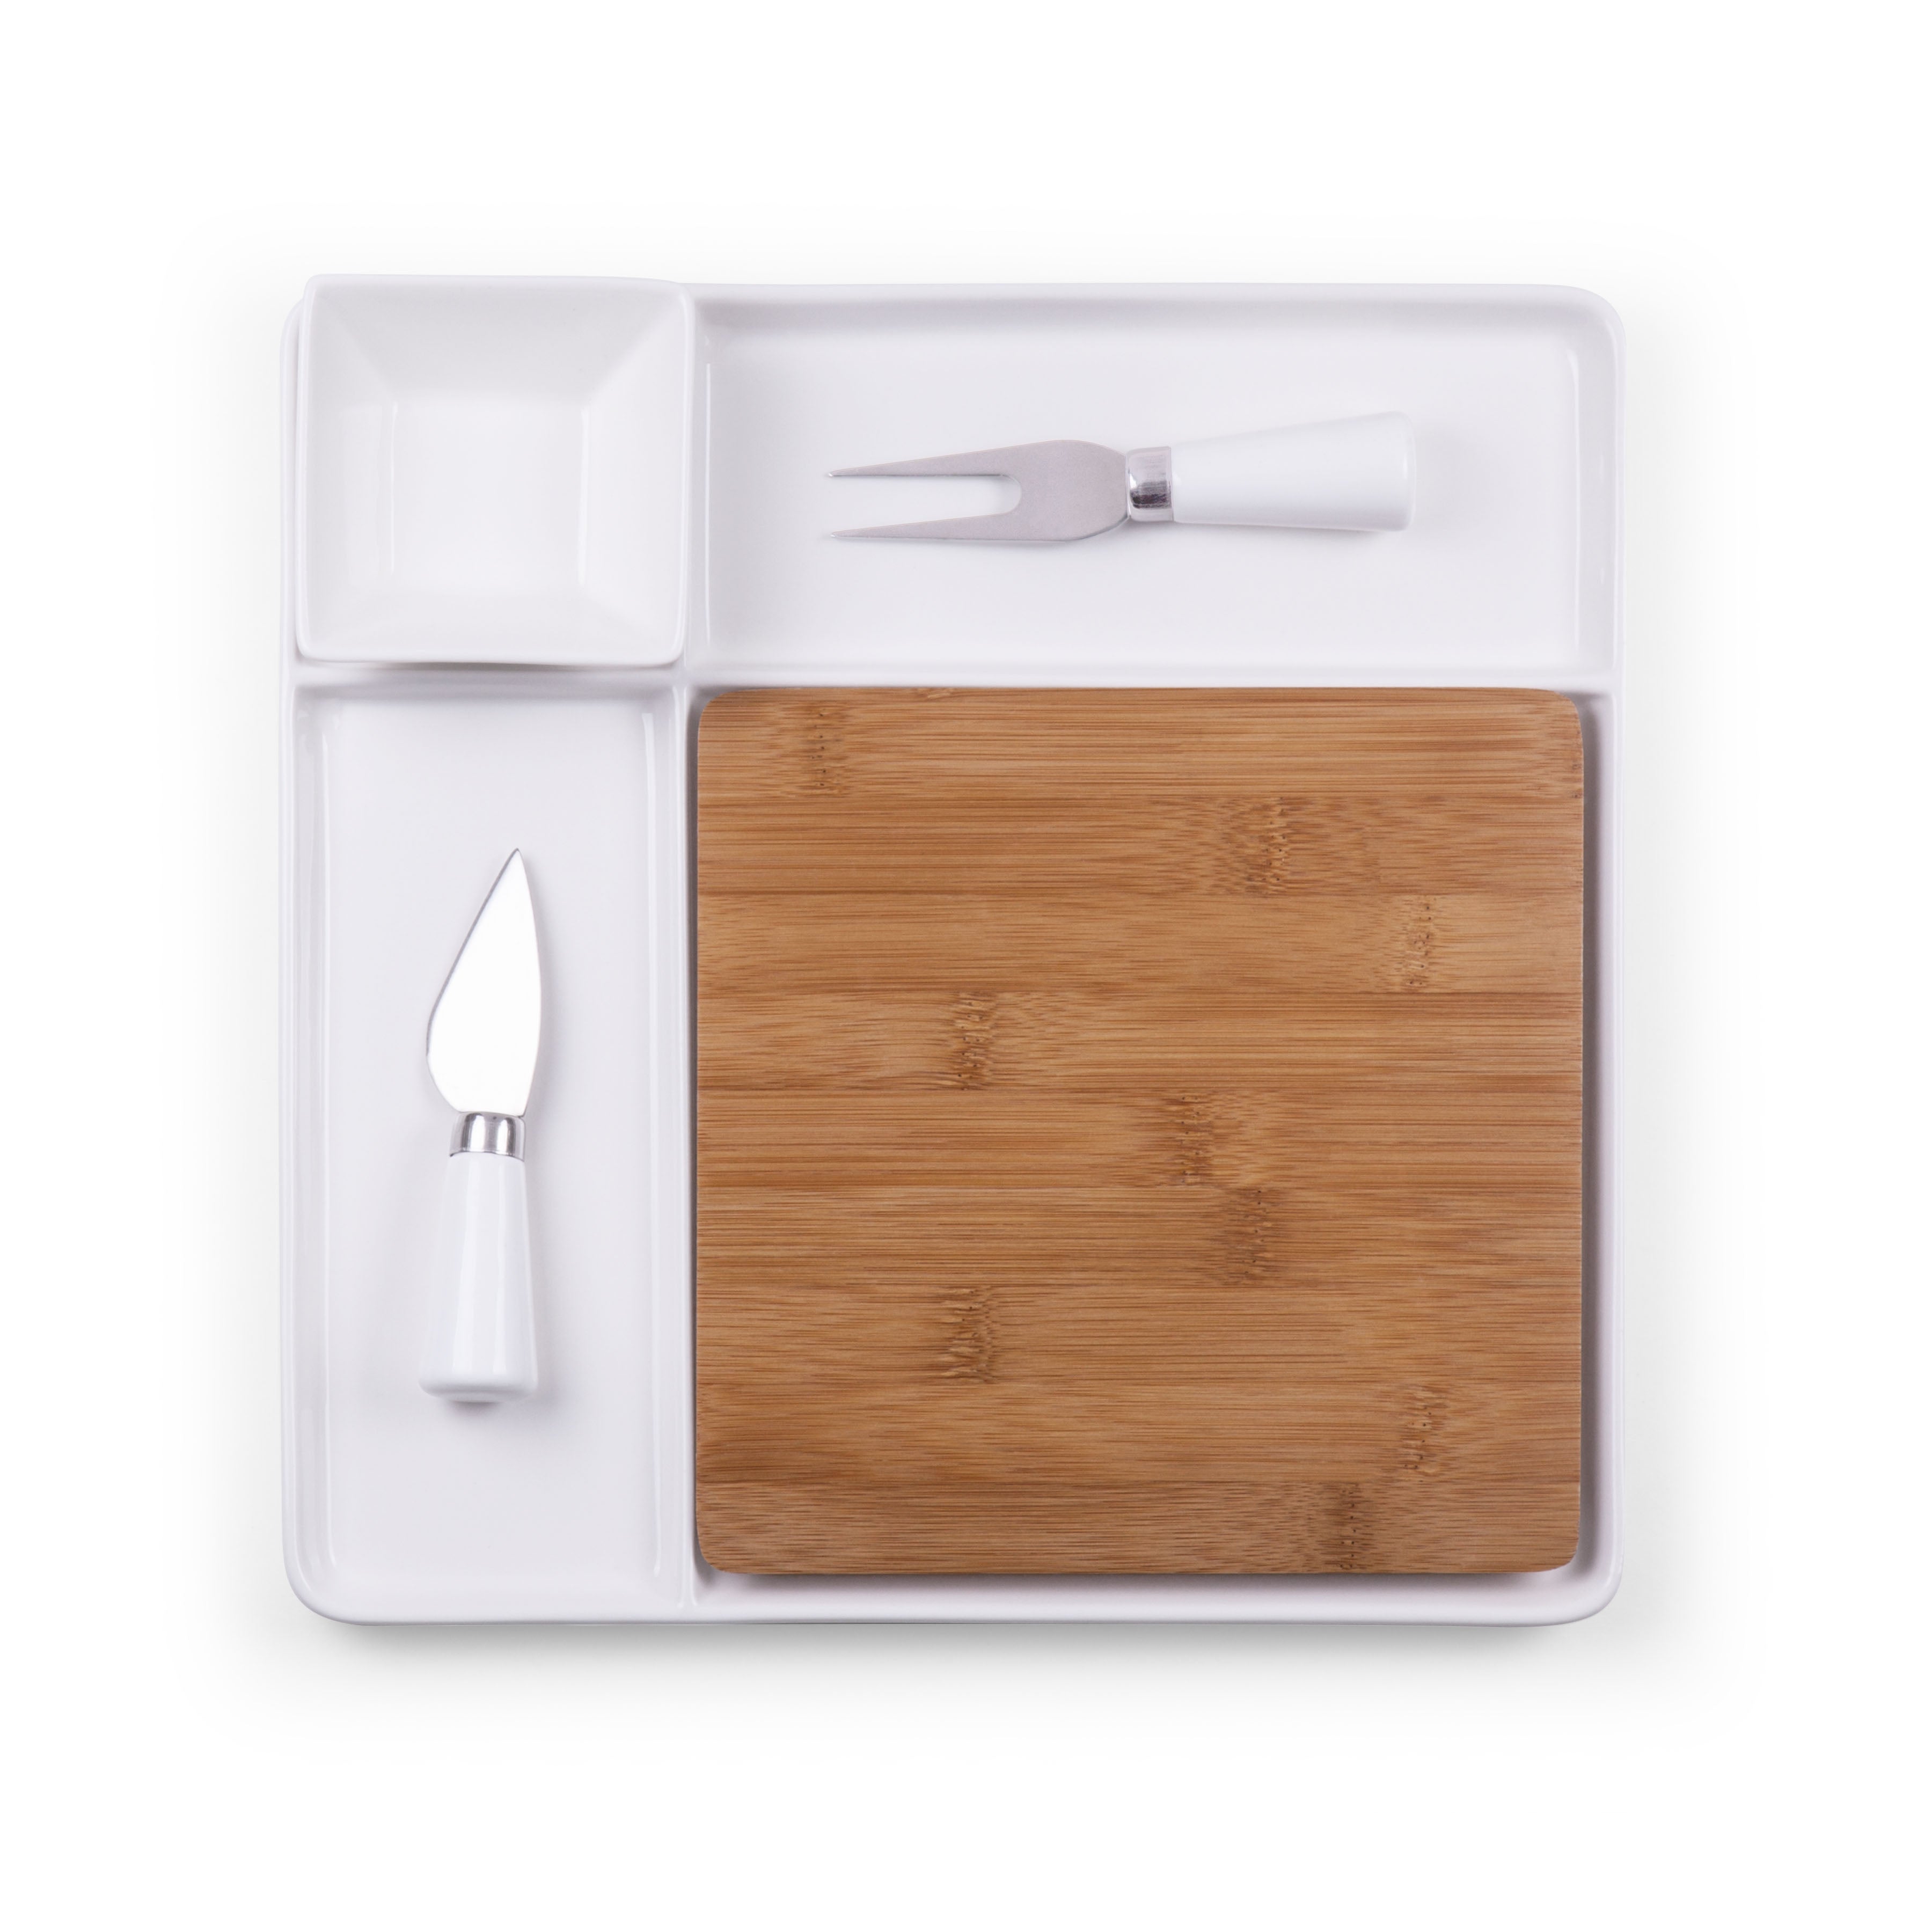 Miami Dolphins - Peninsula Cutting Board & Serving Tray